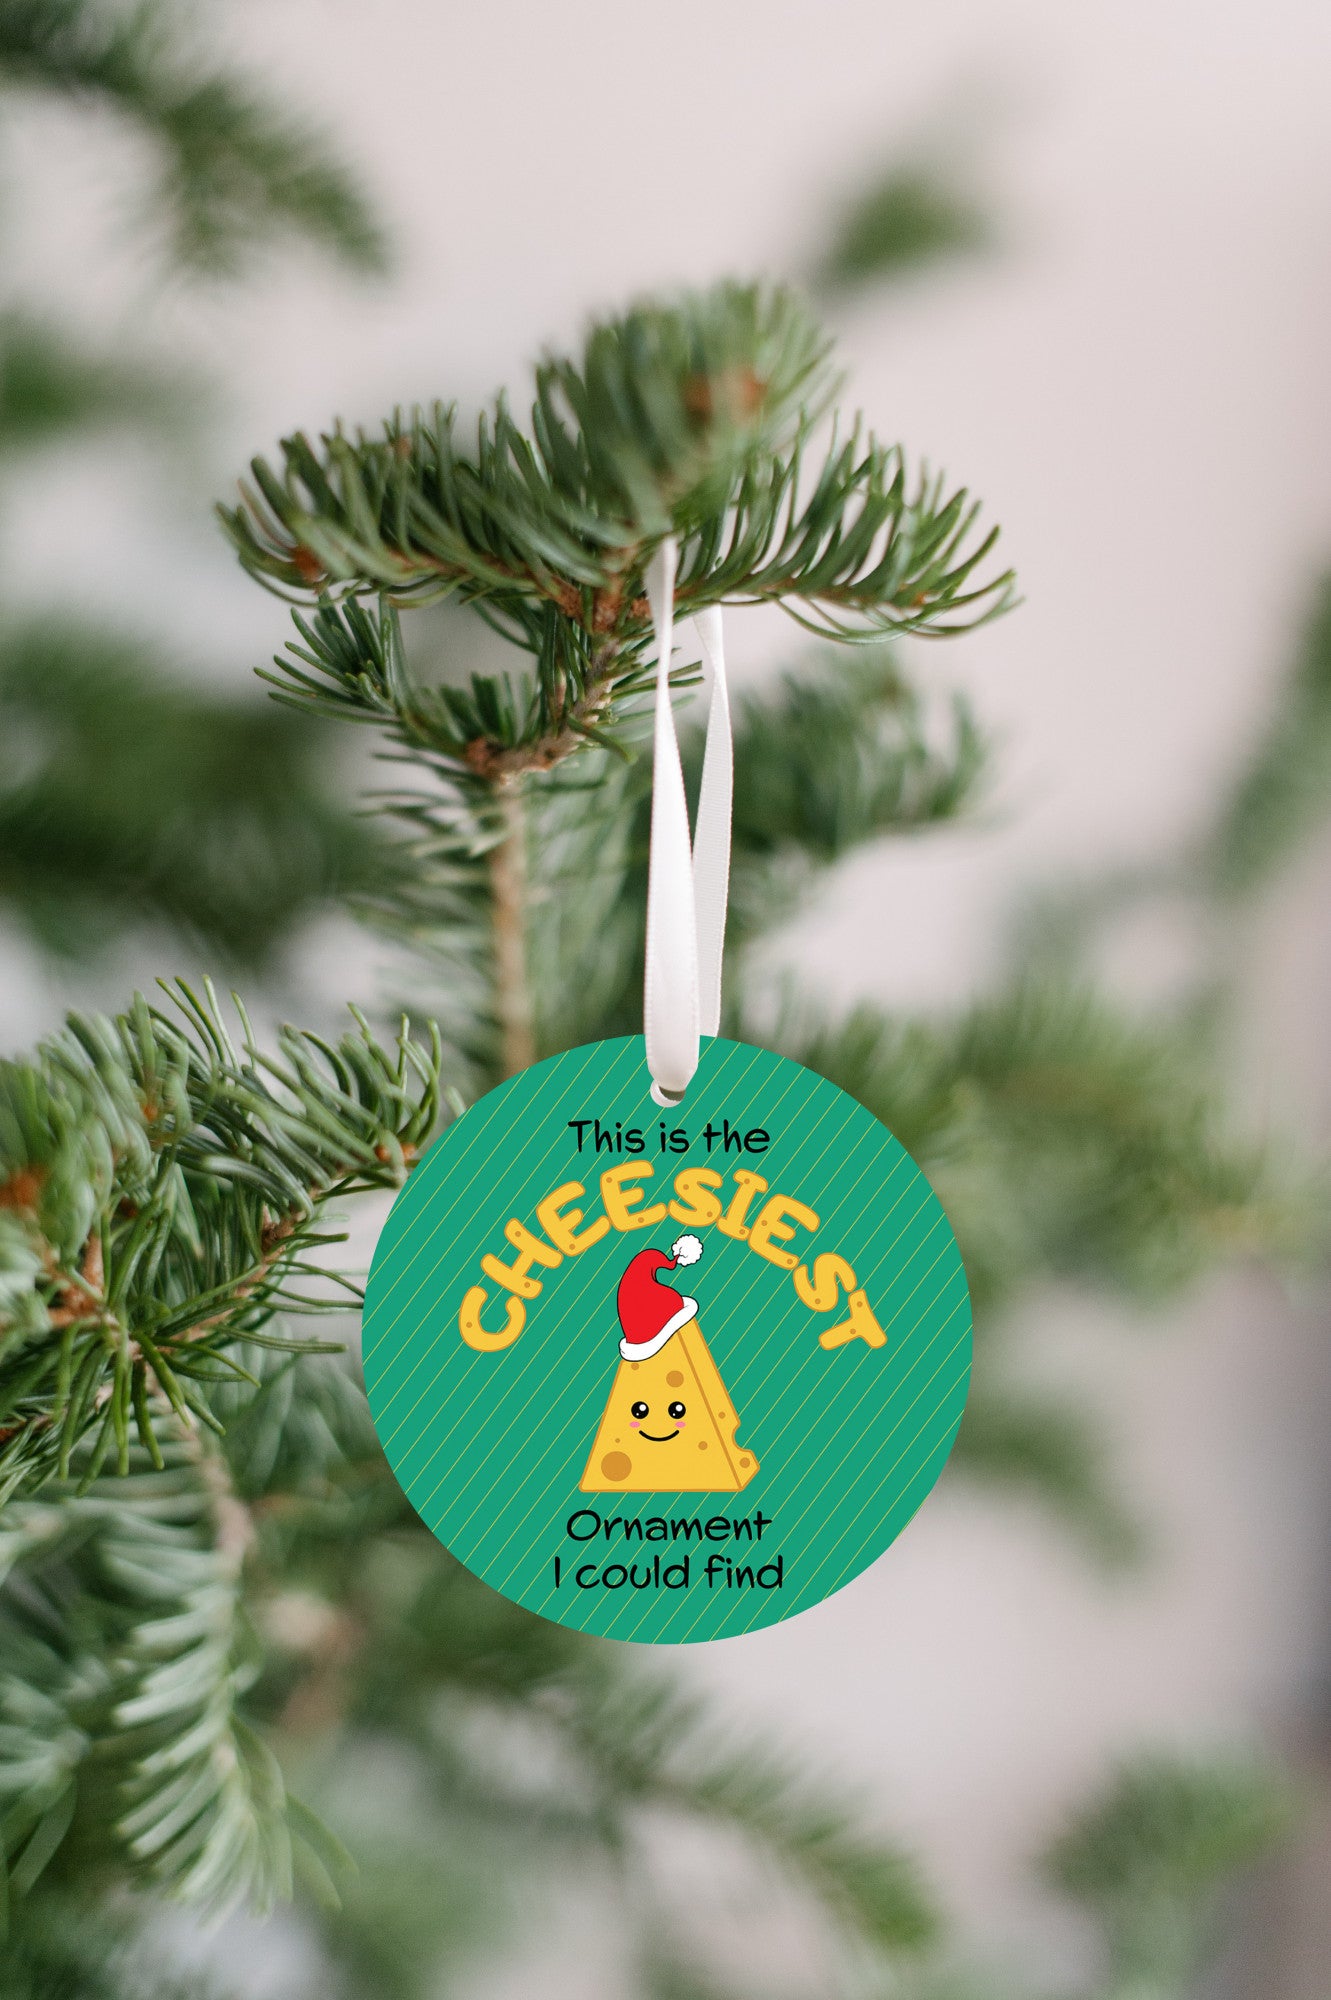 This is the Cheesiest Ornament